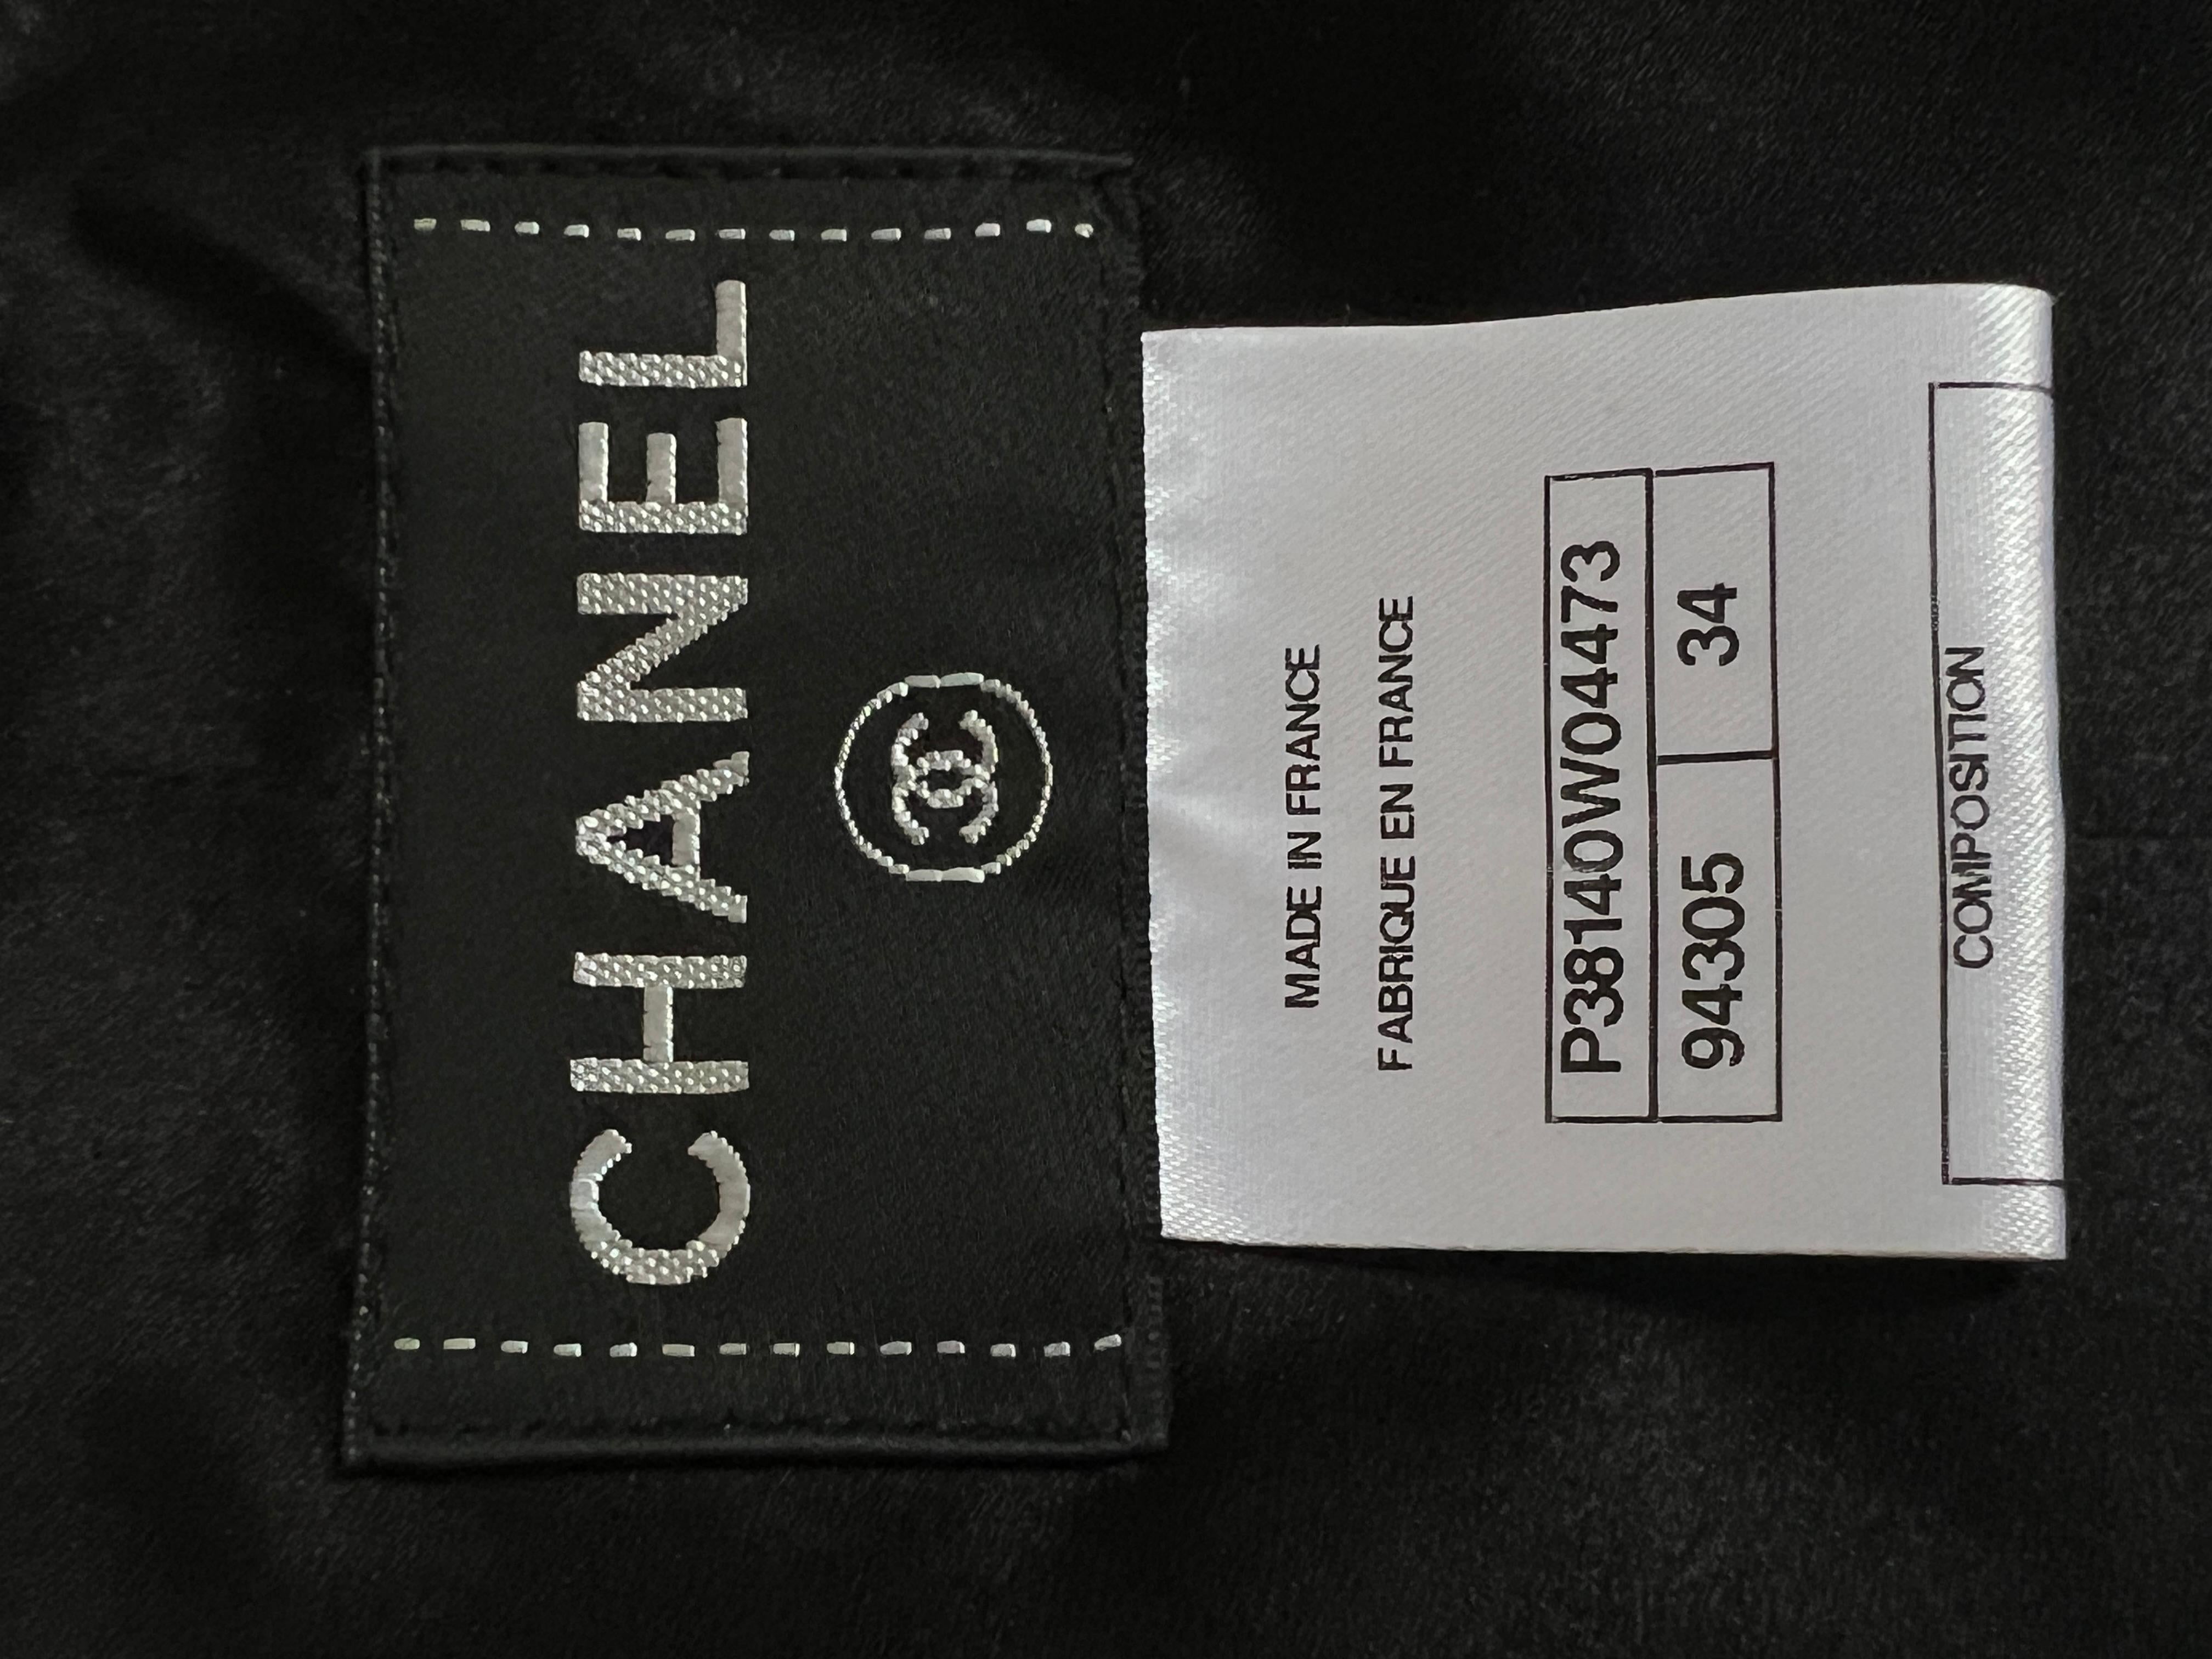 Chanel Super Rare Bejeweled Wheat Tweed Vest For Sale 15